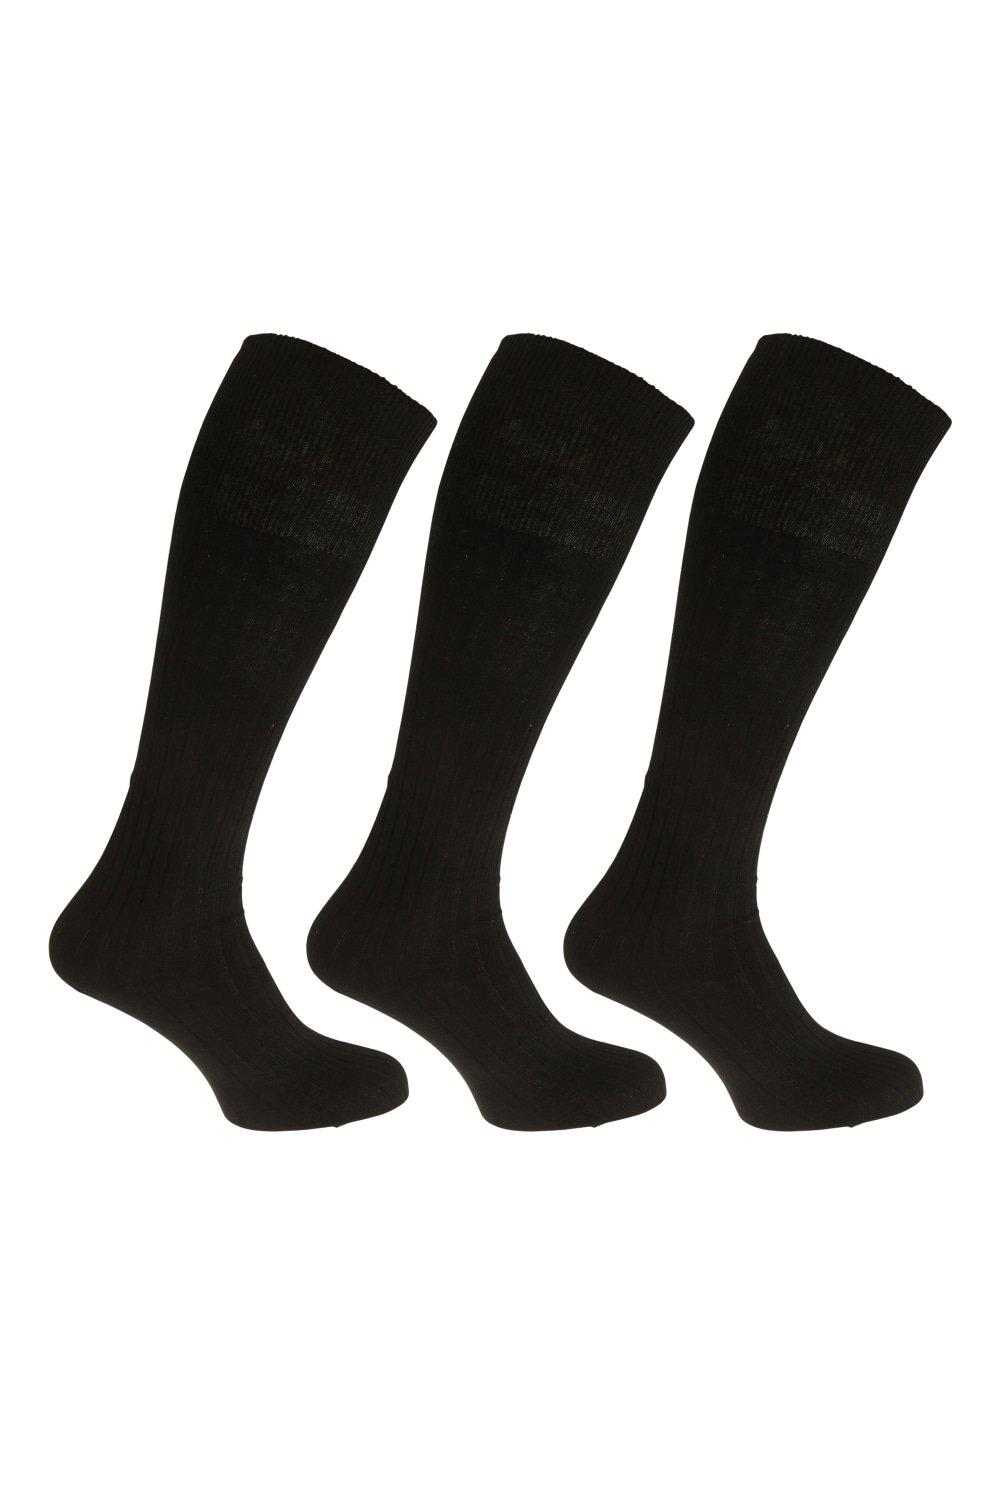 100% Cotton Ribbed Knee High Socks (Pack Of 3)